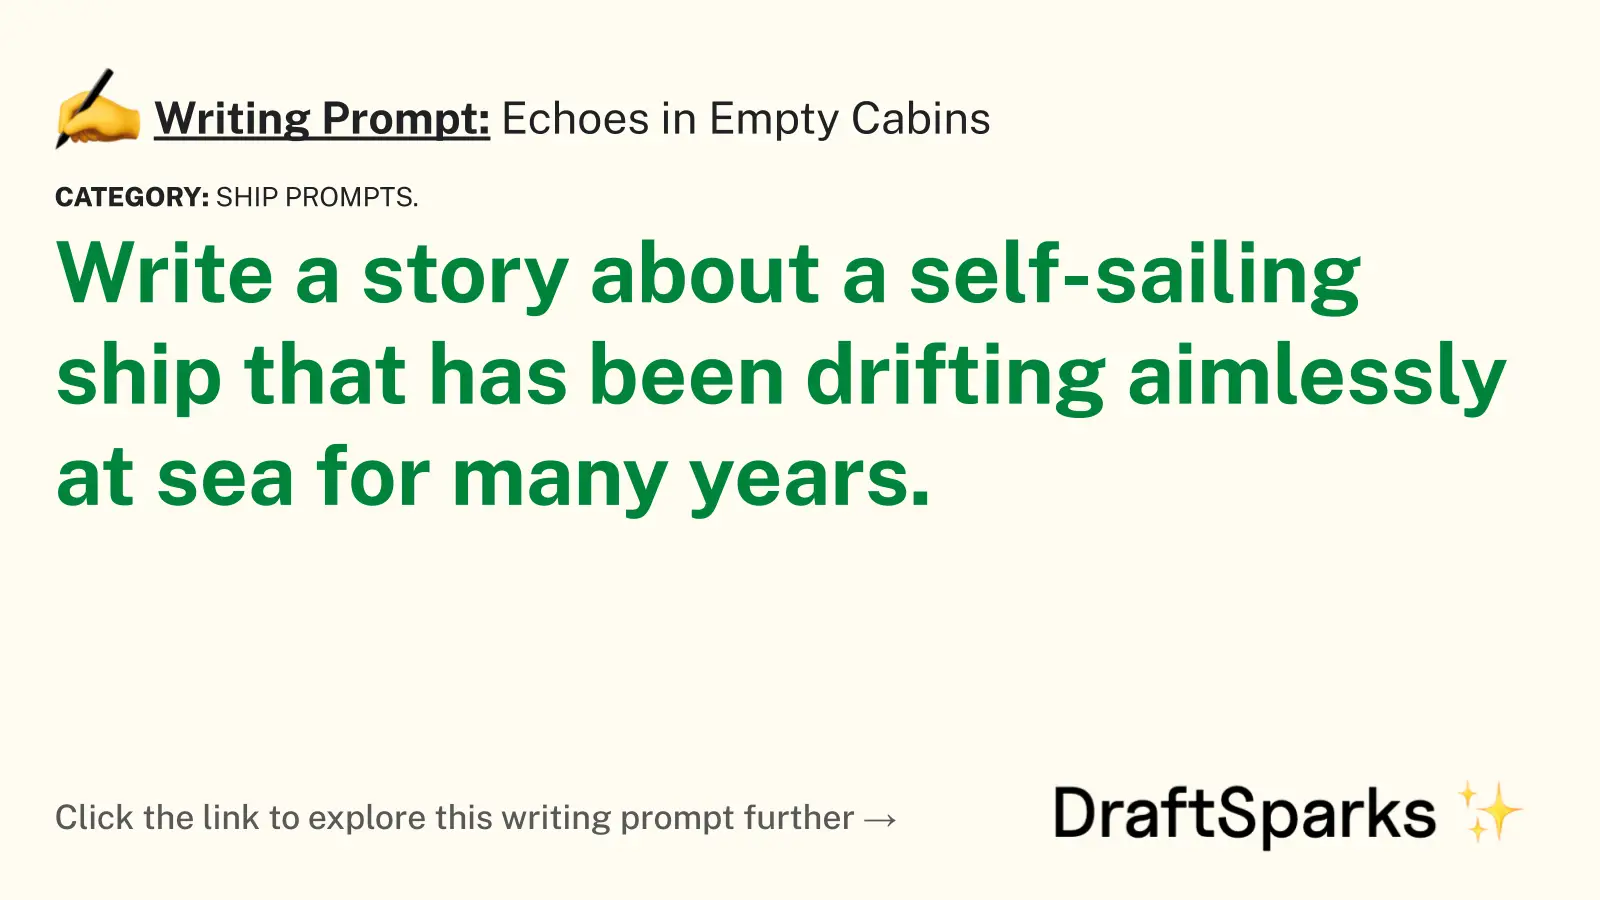 Echoes in Empty Cabins